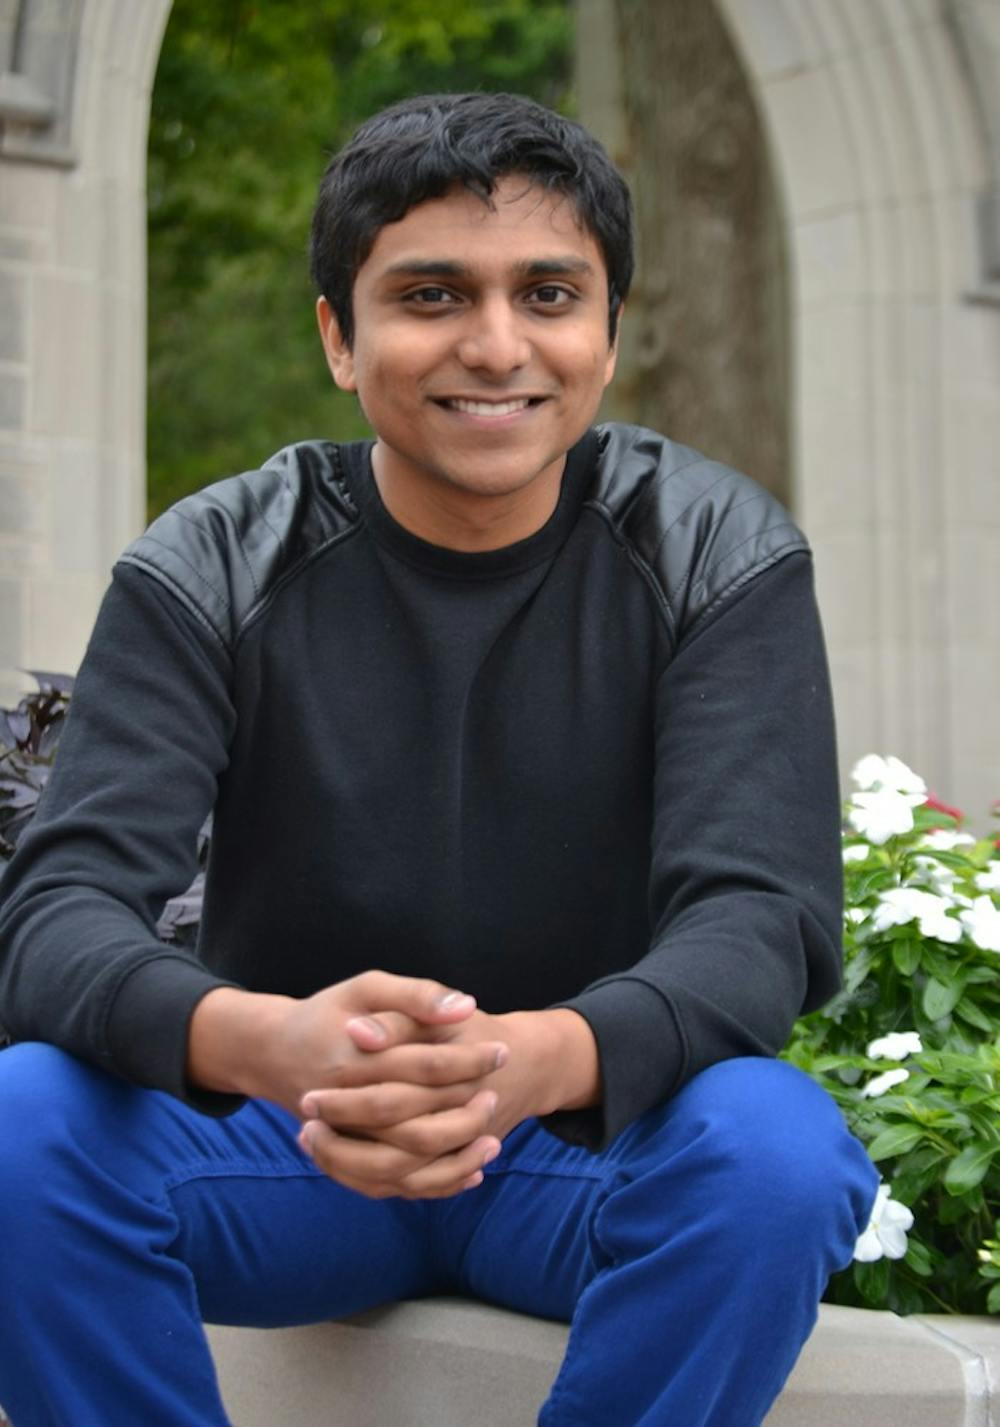 Nitish Kulkarni, a senior at IU, recorded his debut album Synesthetic this summer through EverSound Music. The album, produced by John Adorney, will be released this fall.